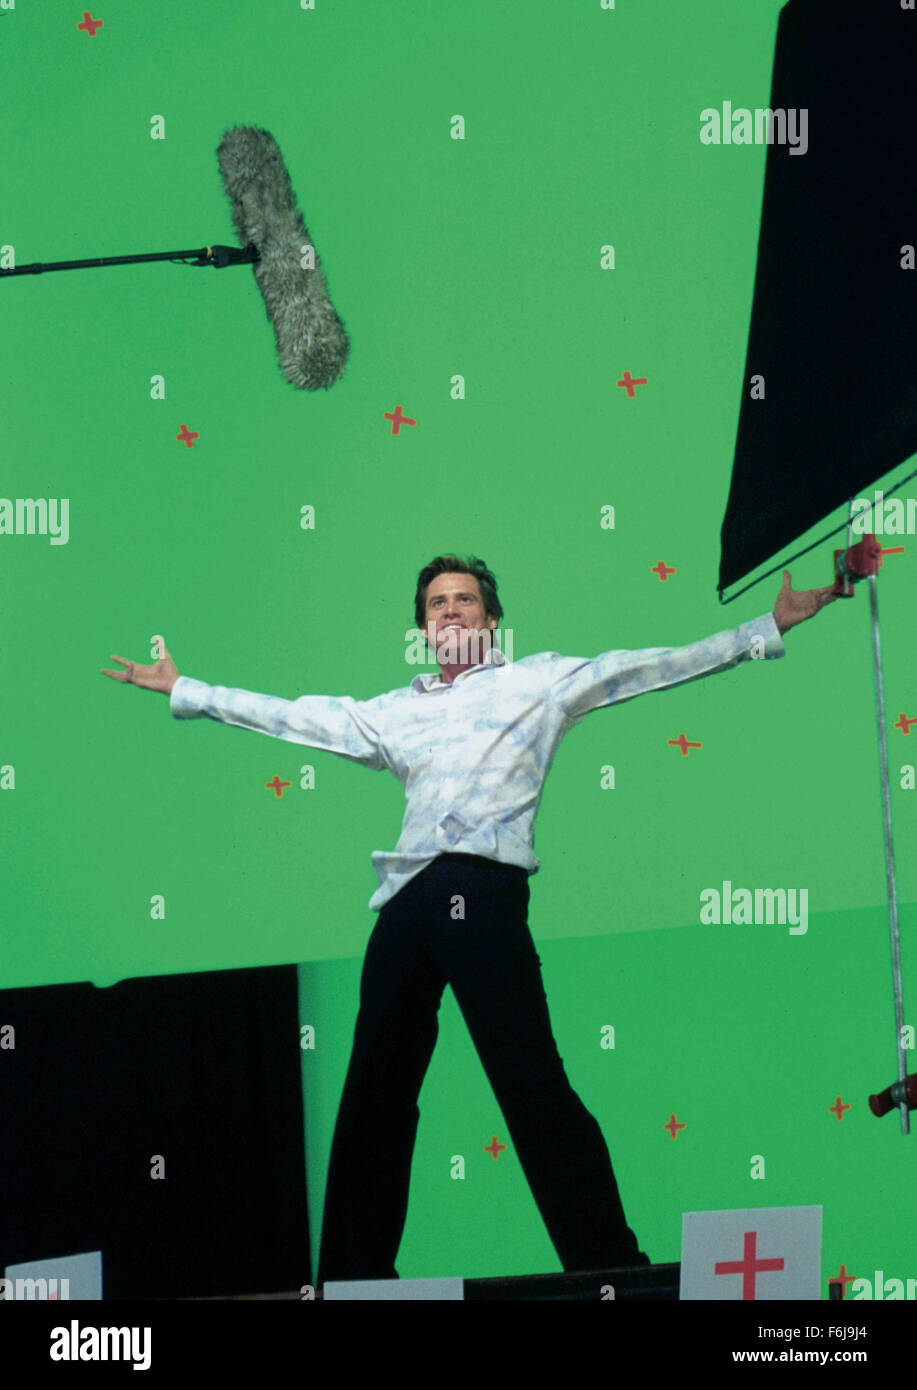 Apr 05, 2003; Hollywood, CA, USA; Actor JIM CARREY on set as Bruce Nolan in Tom Shadyac's hysterical comedy, 'Bruce Almighty'. Stock Photo